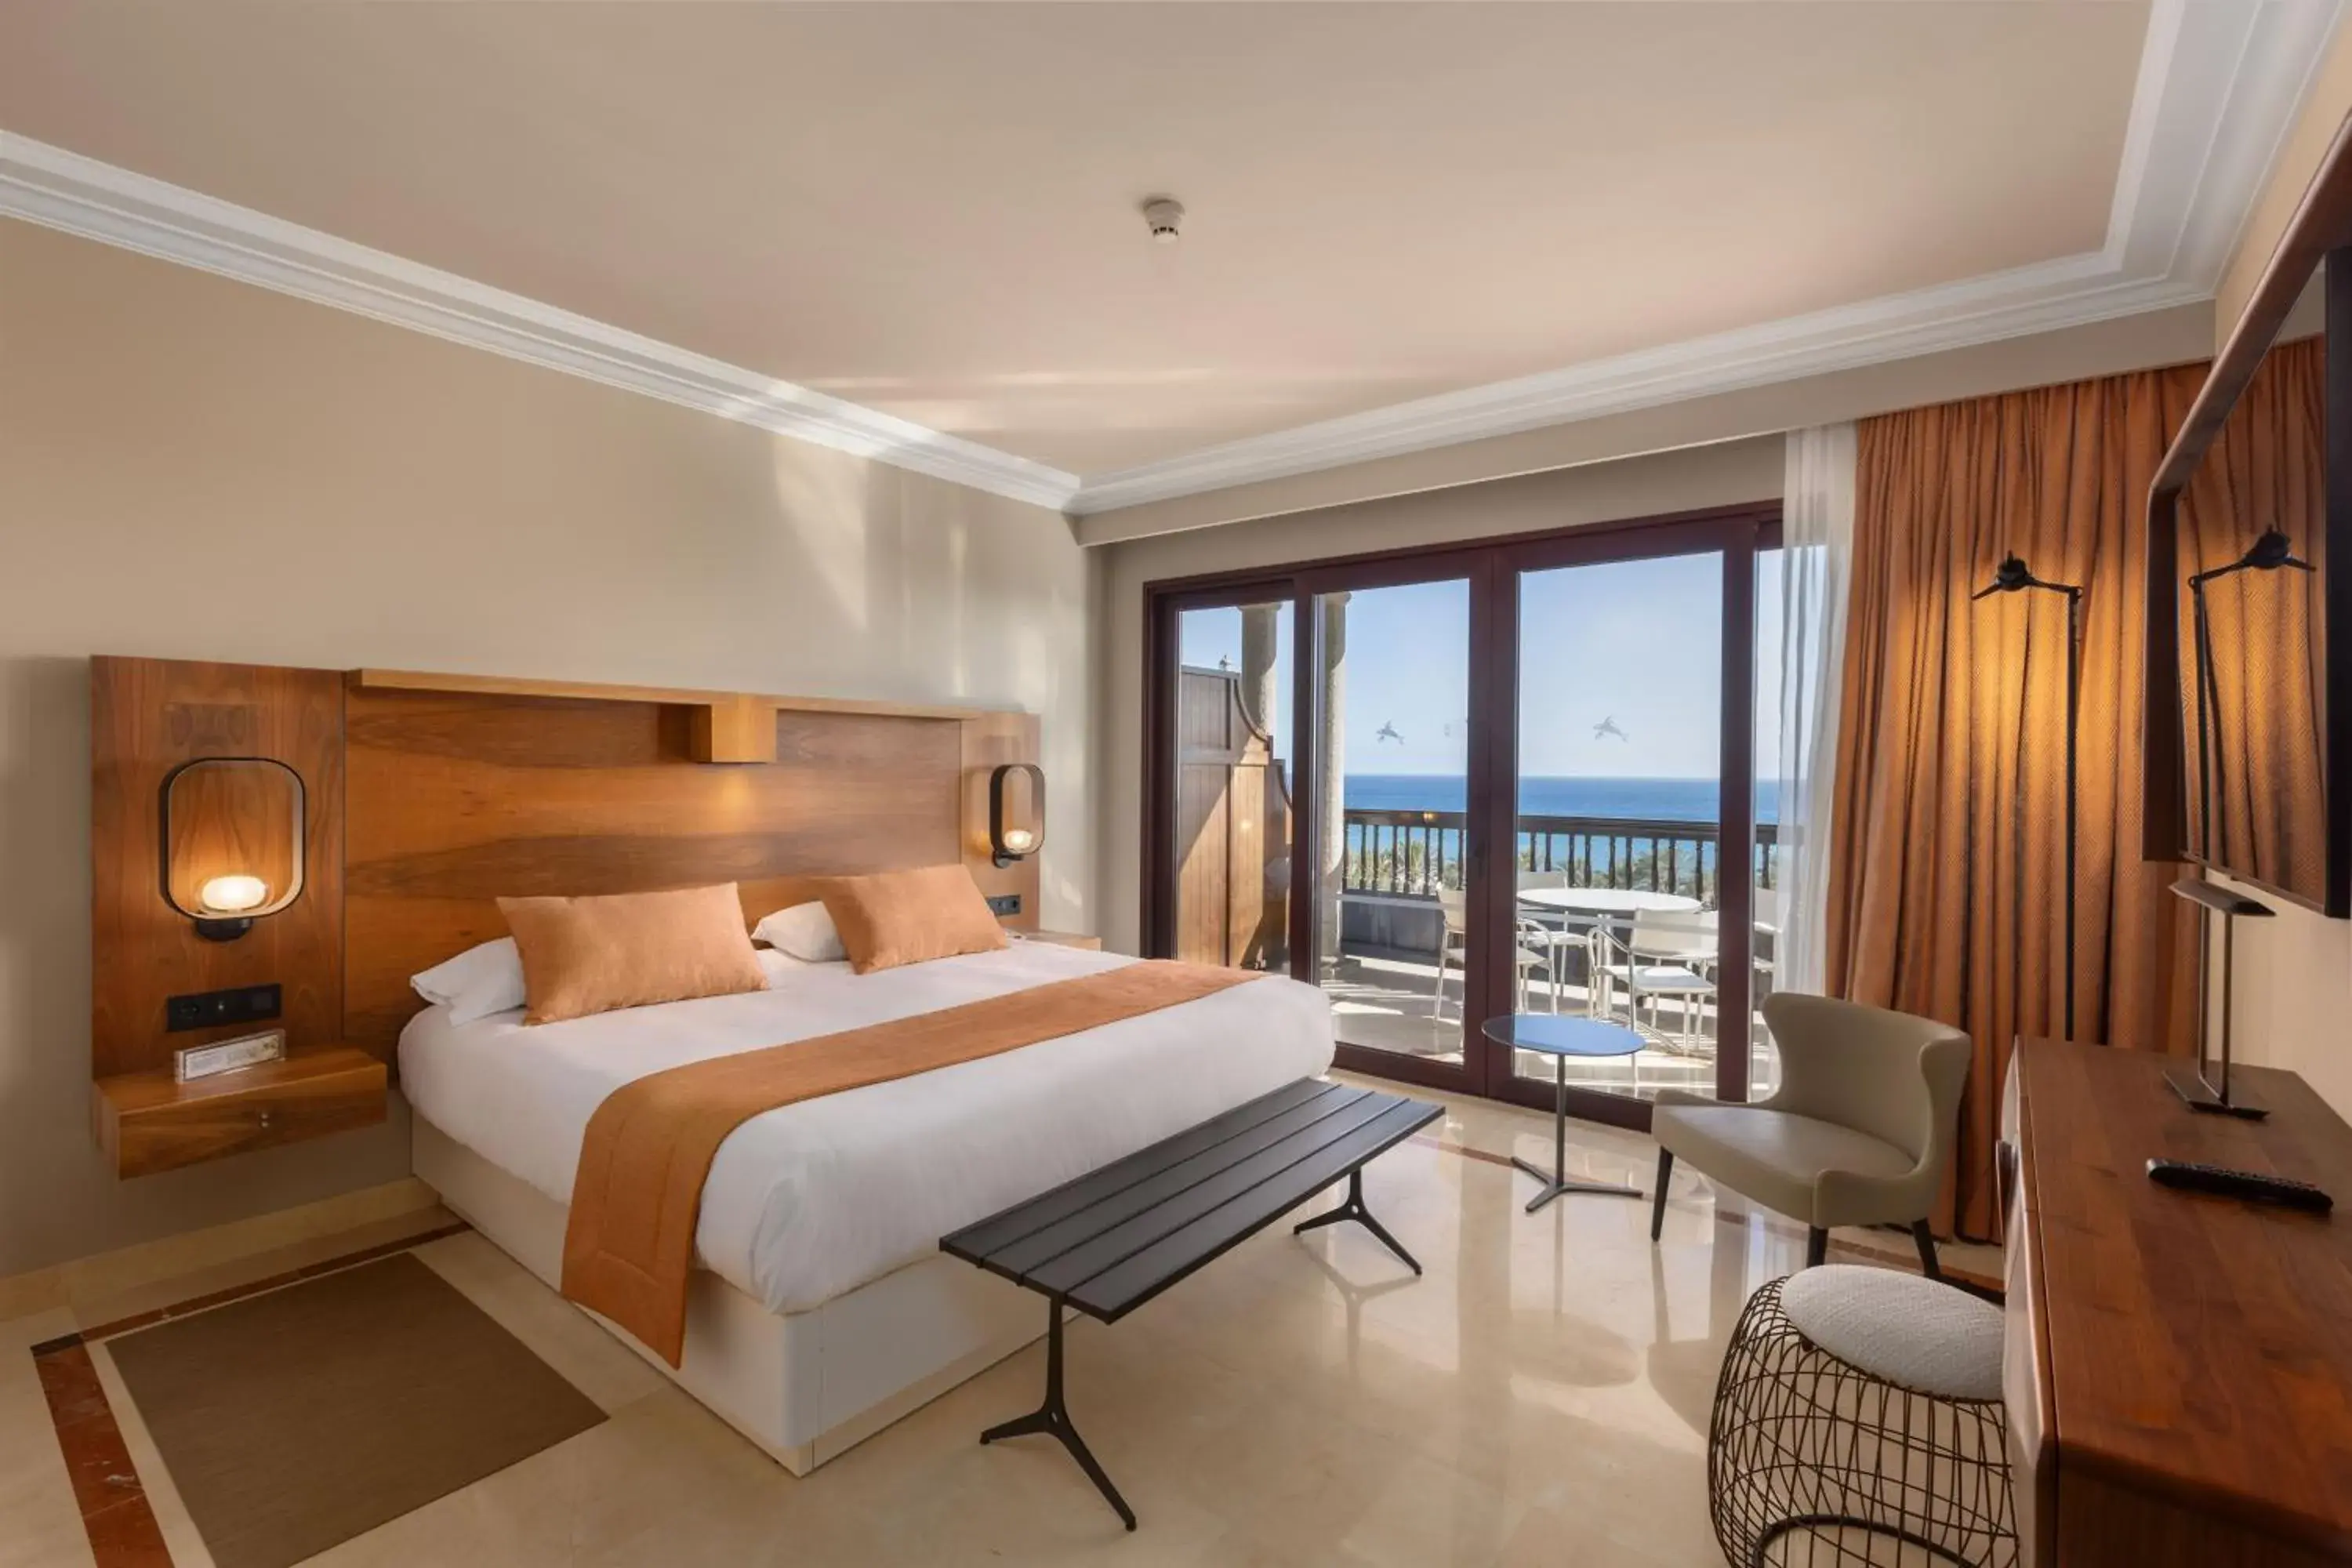  Master Suite View  - single occupancy in Lopesan Costa Meloneras Resort & Spa